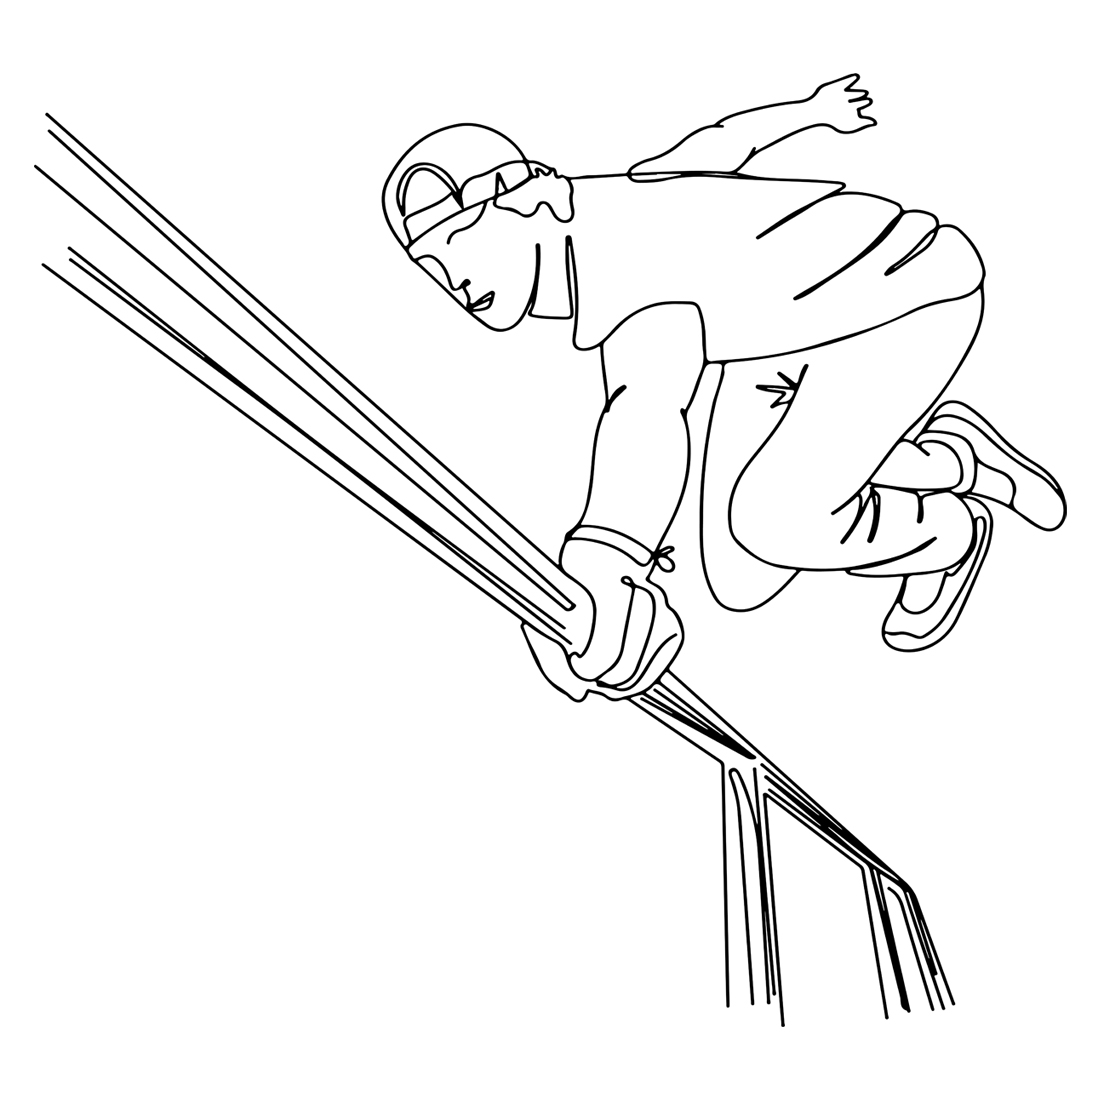 Parkour Jump Silhouette: One-Line Illustration for Dynamic Action, Street Dynamo One-Line Sketch: Man Parkour Jumping Vector, Street Dynamo's One-Line Parkour Jump preview image.